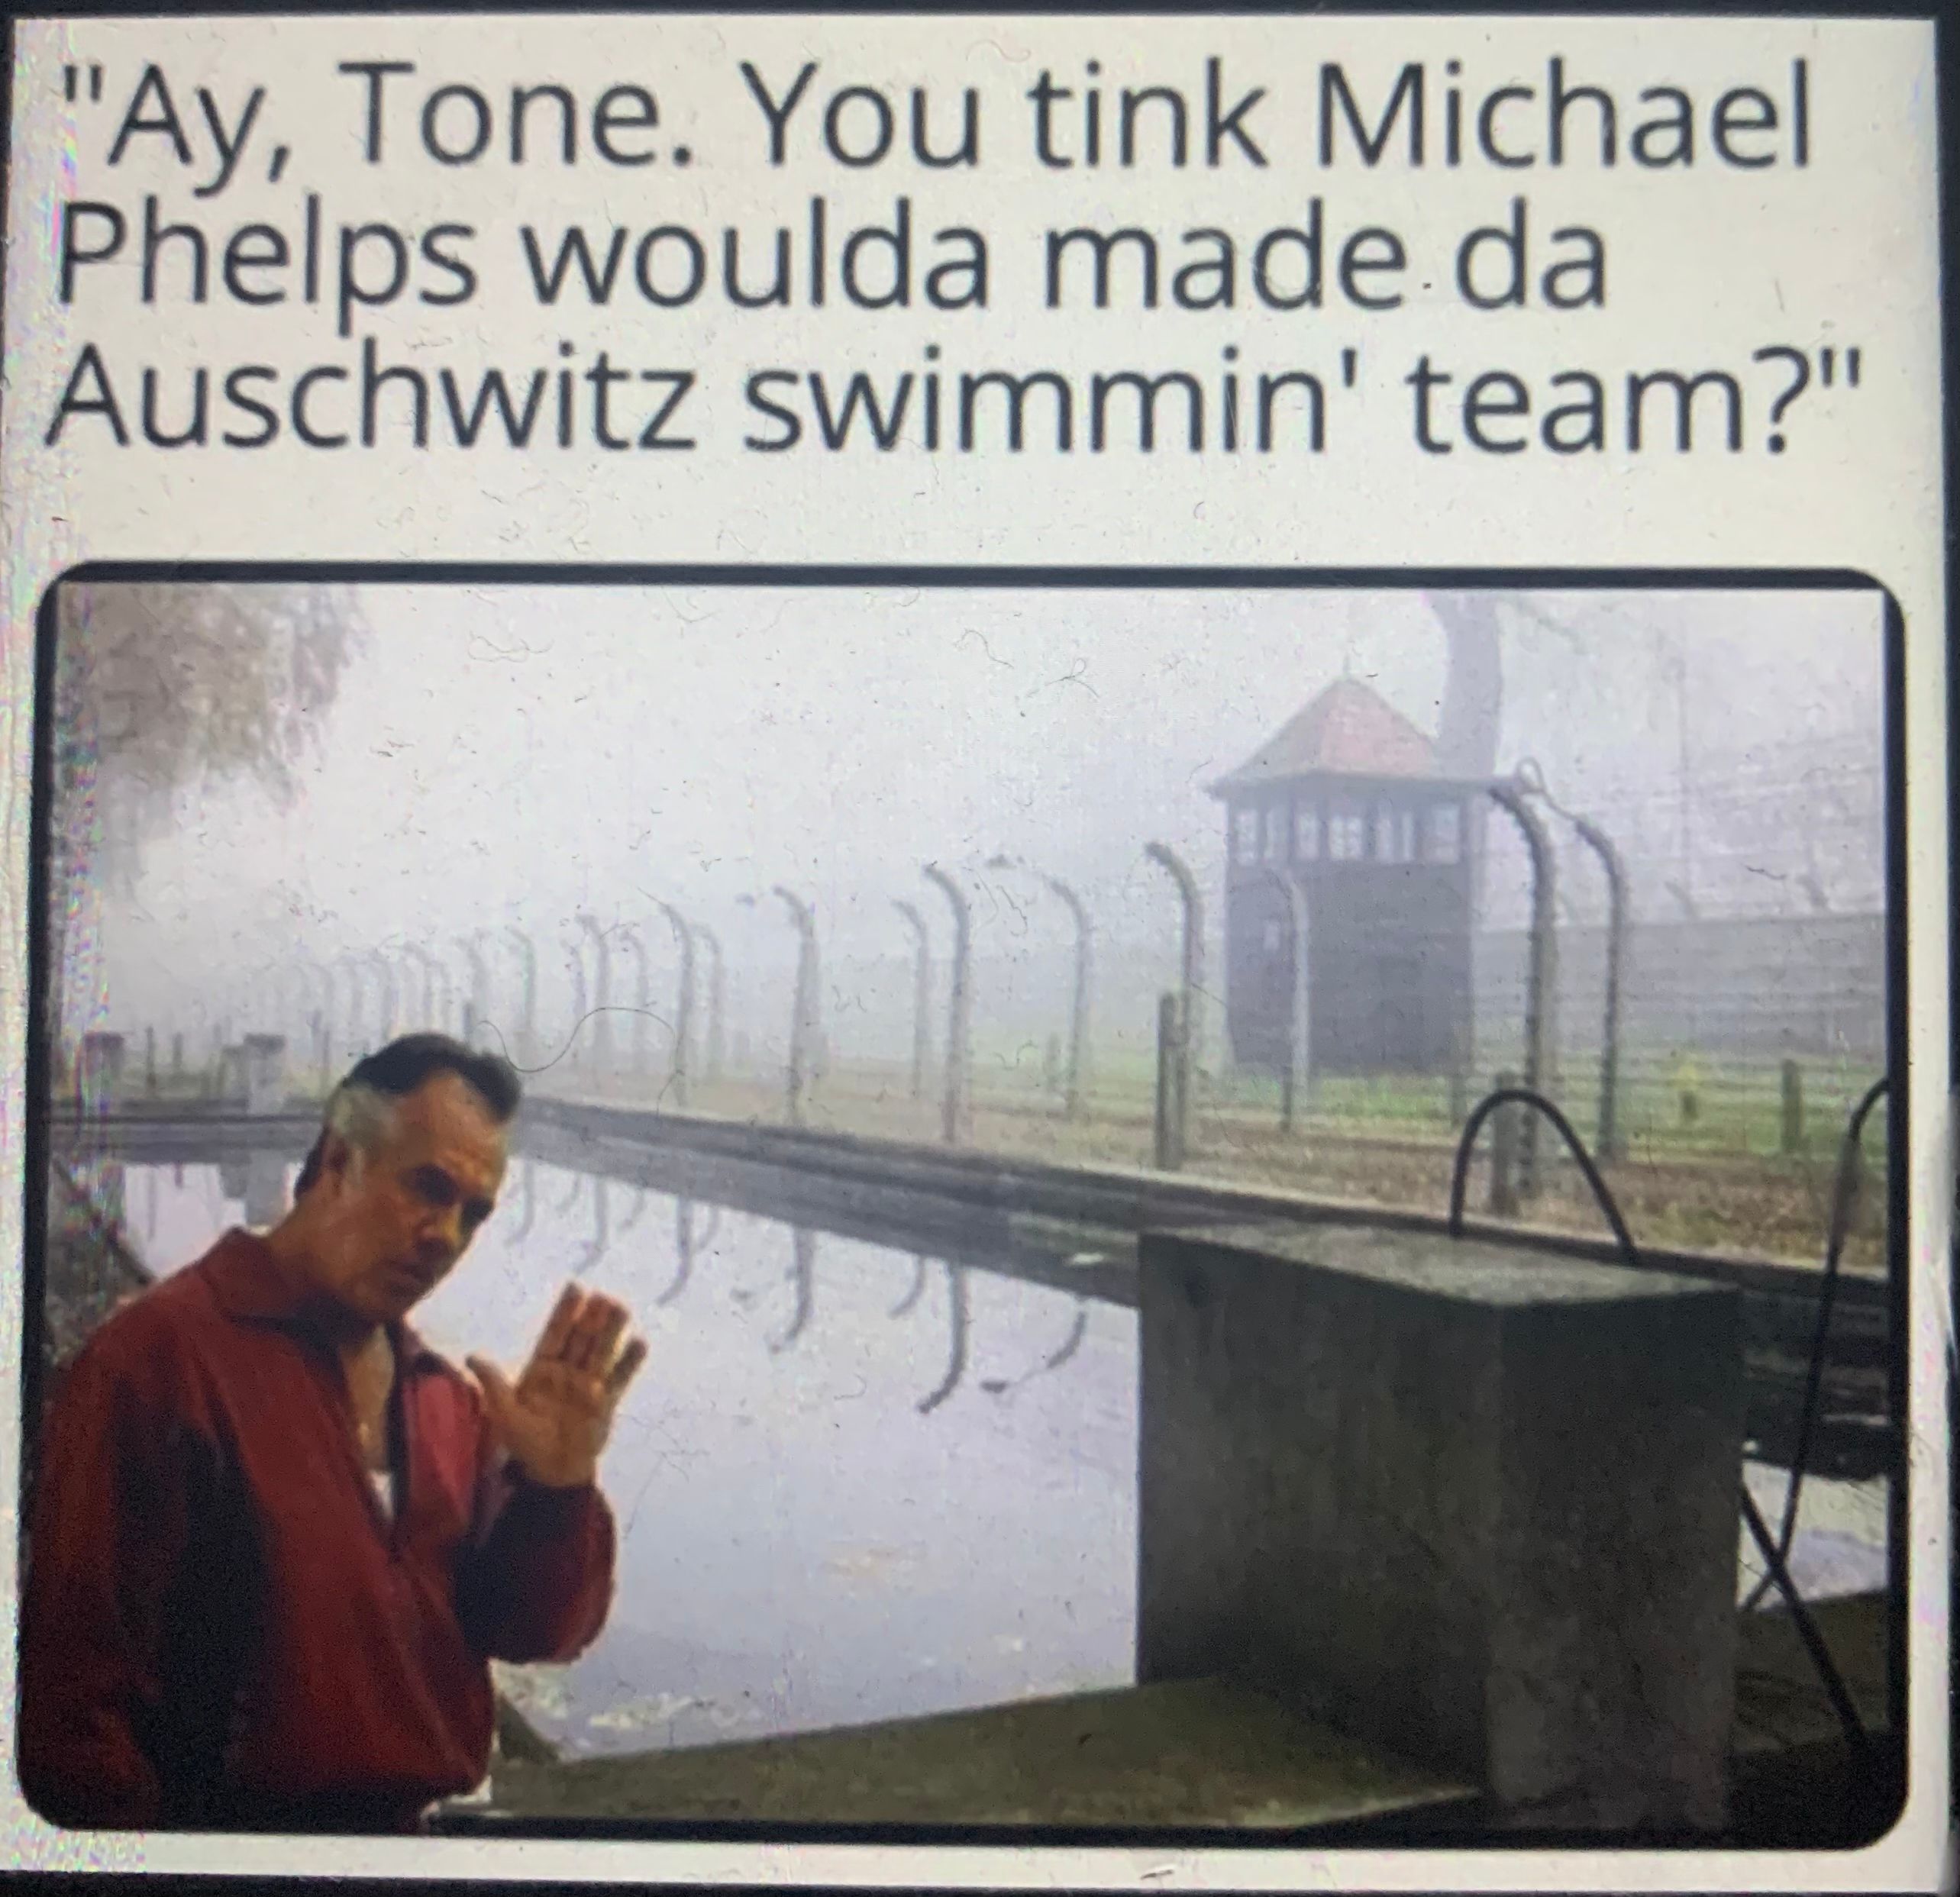 A picture of Paulie from The Sopranos standing by the Auschwitz pool, with text above that reads 'Ay, Tone. You tink Michael Phelps woulda made da Auschwitz swimmin' team?'.